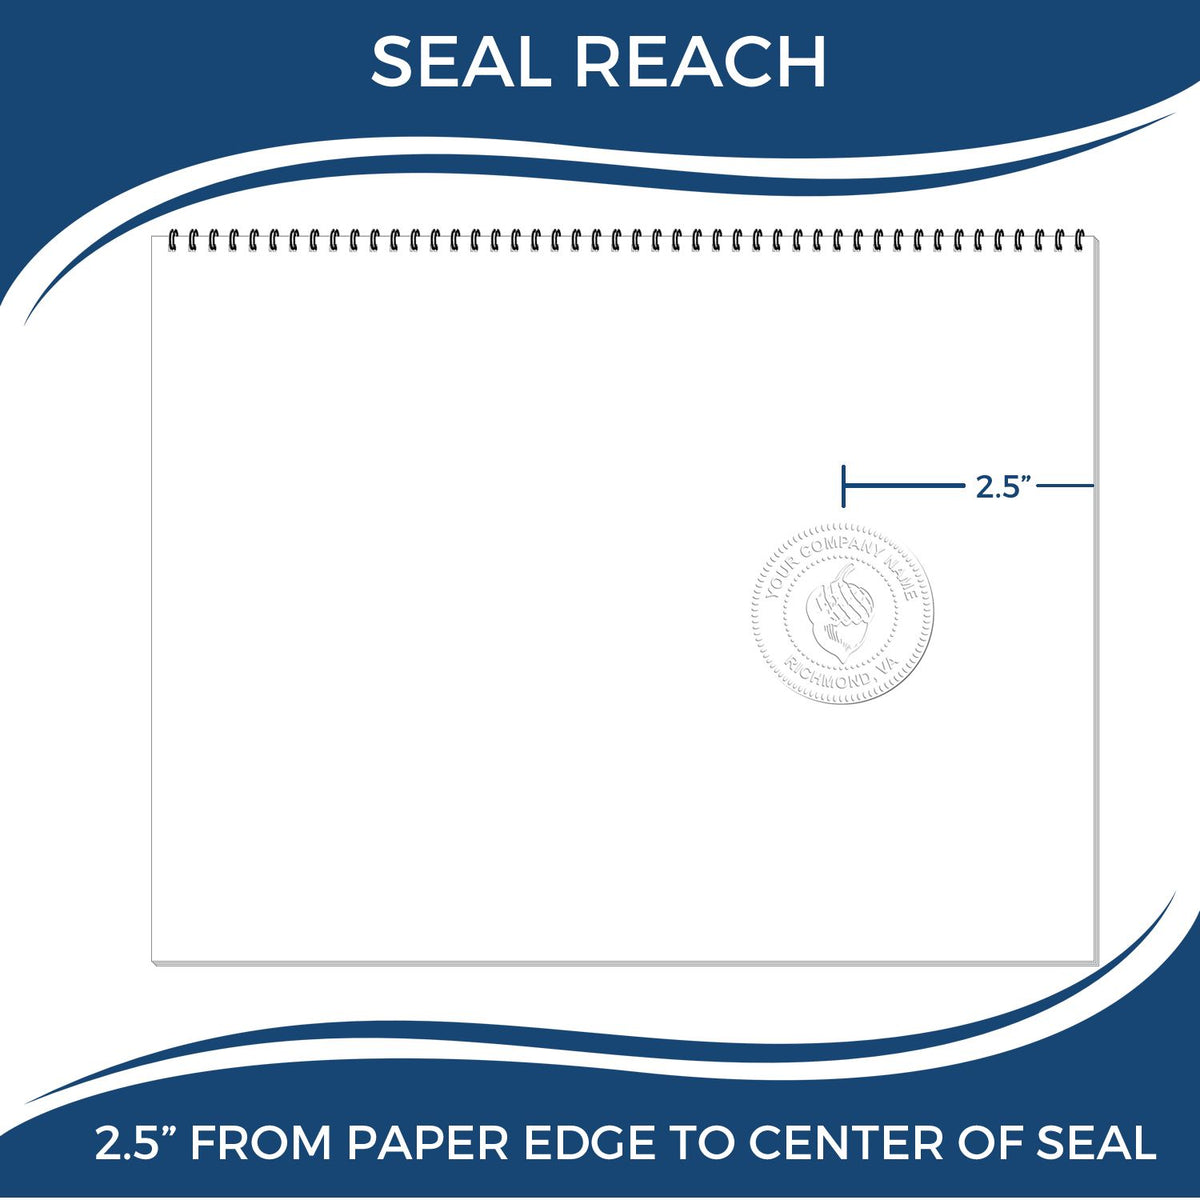 An infographic showing the seal reach which is represented by a ruler and a miniature seal image of the Heavy Duty Cast Iron Montana Geologist Seal Embosser